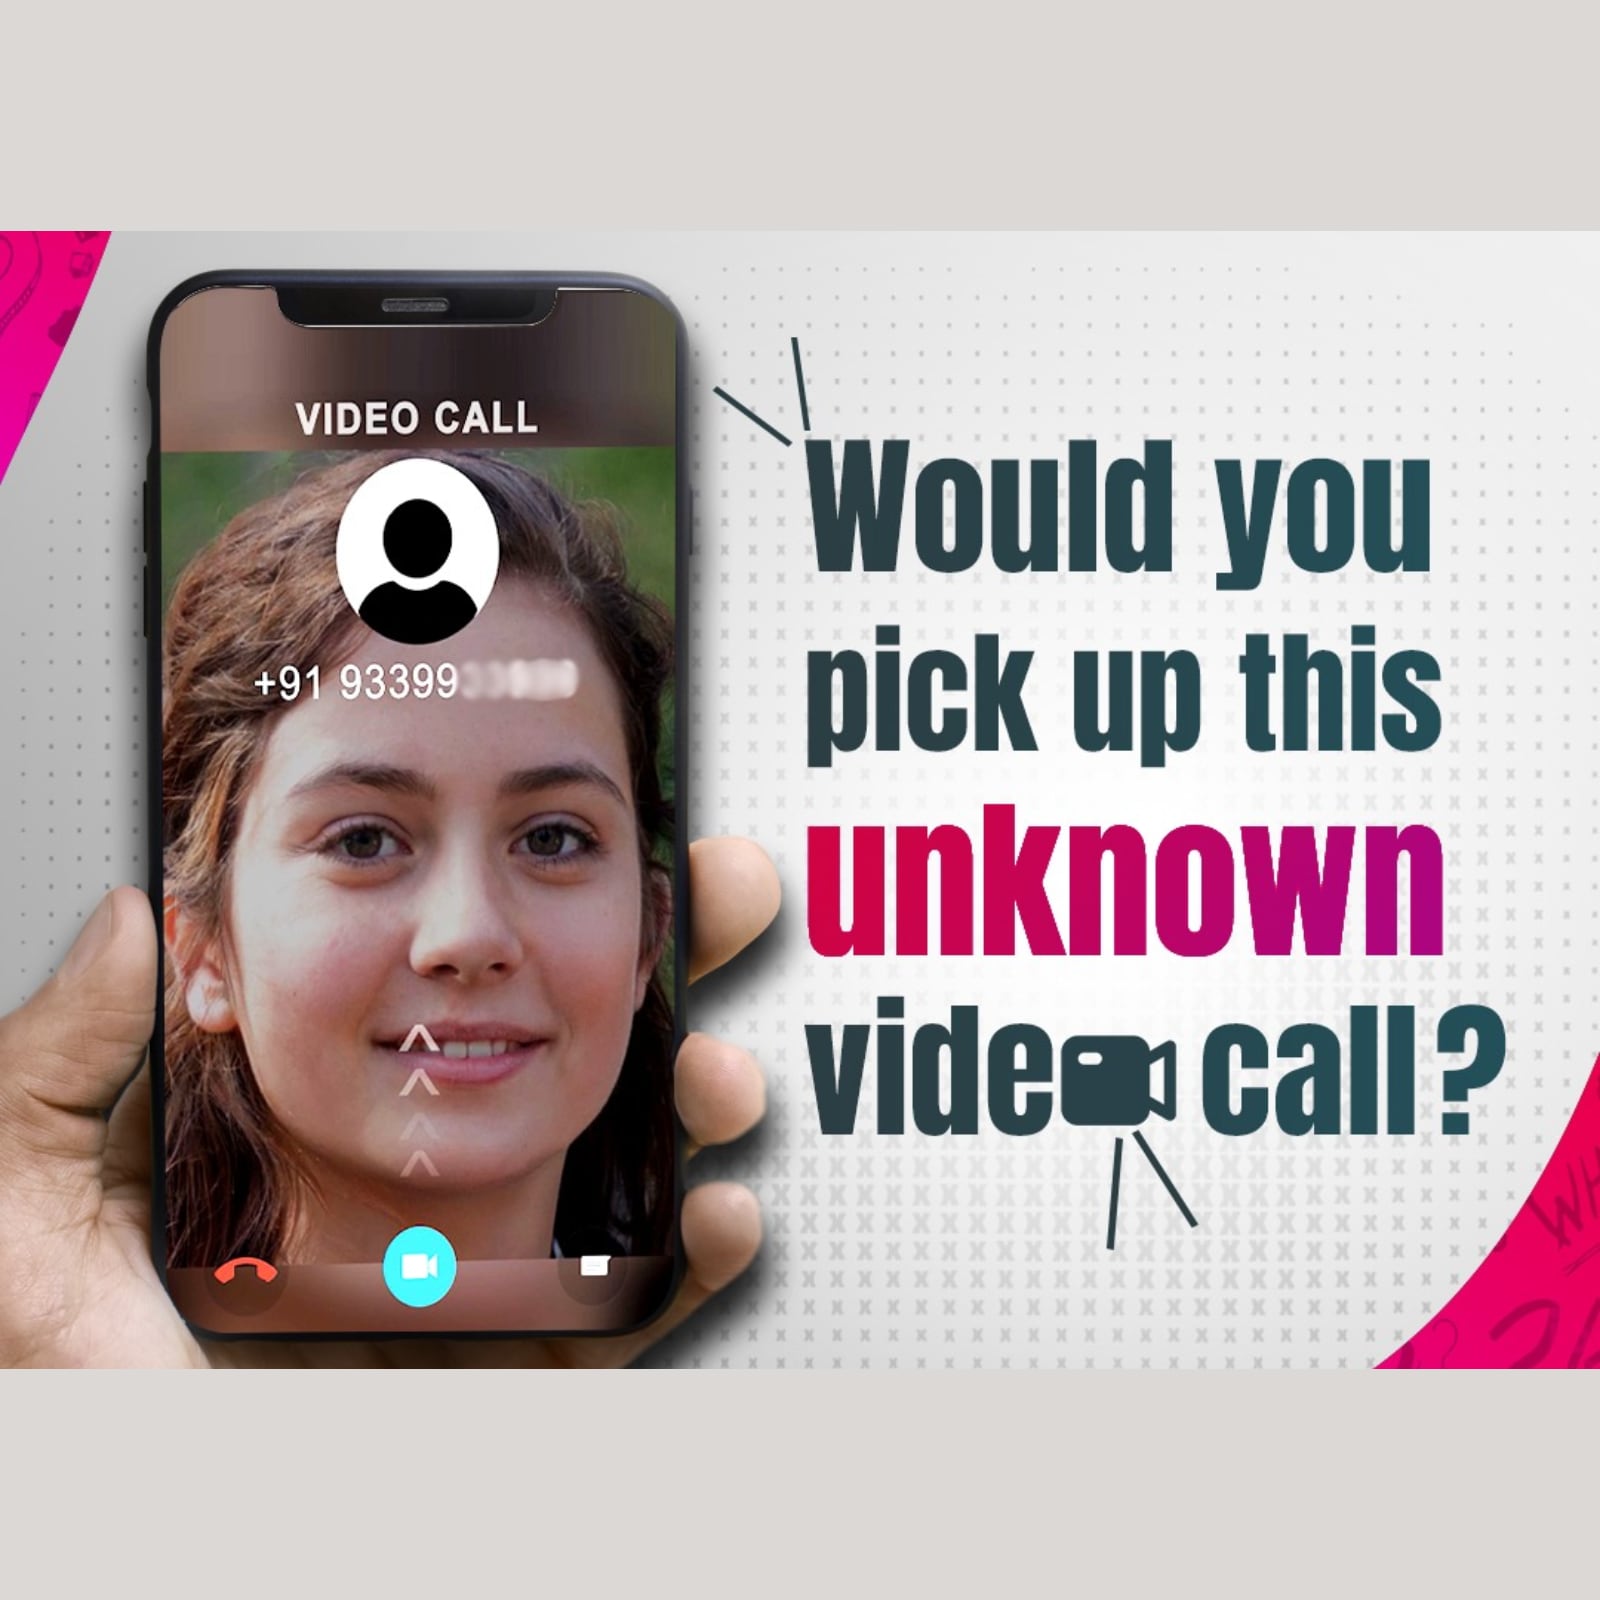 Hacker Anonymous calling you - Video call from hacker and chats